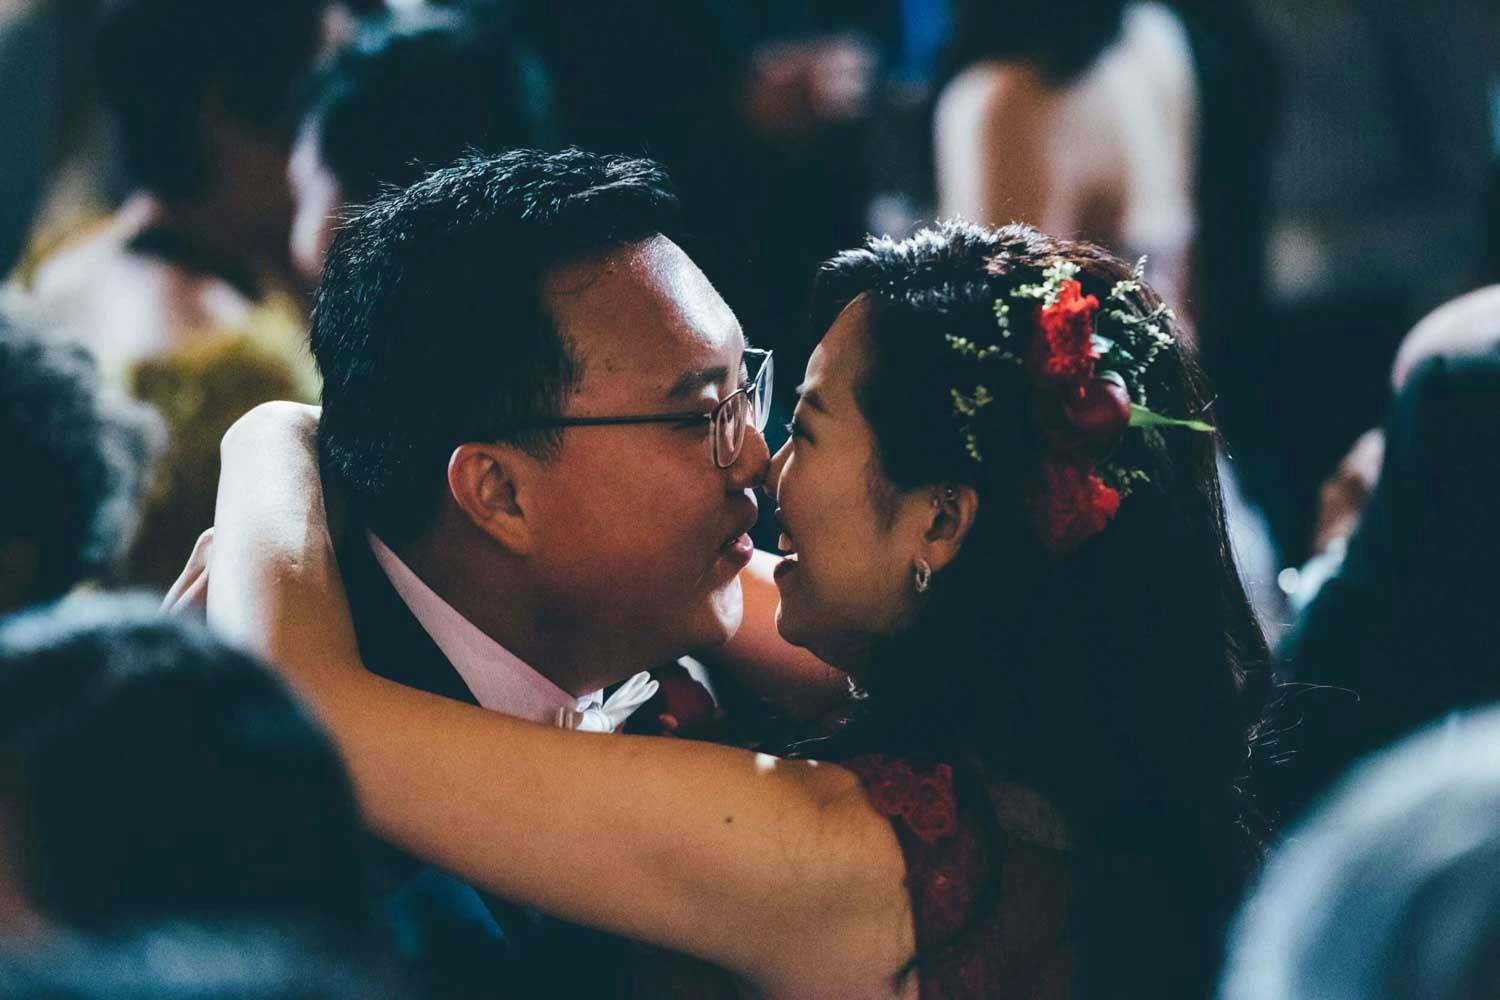 bride-and-groom-dancing-together-best-wedding-photographer-in-singapore-actual-day